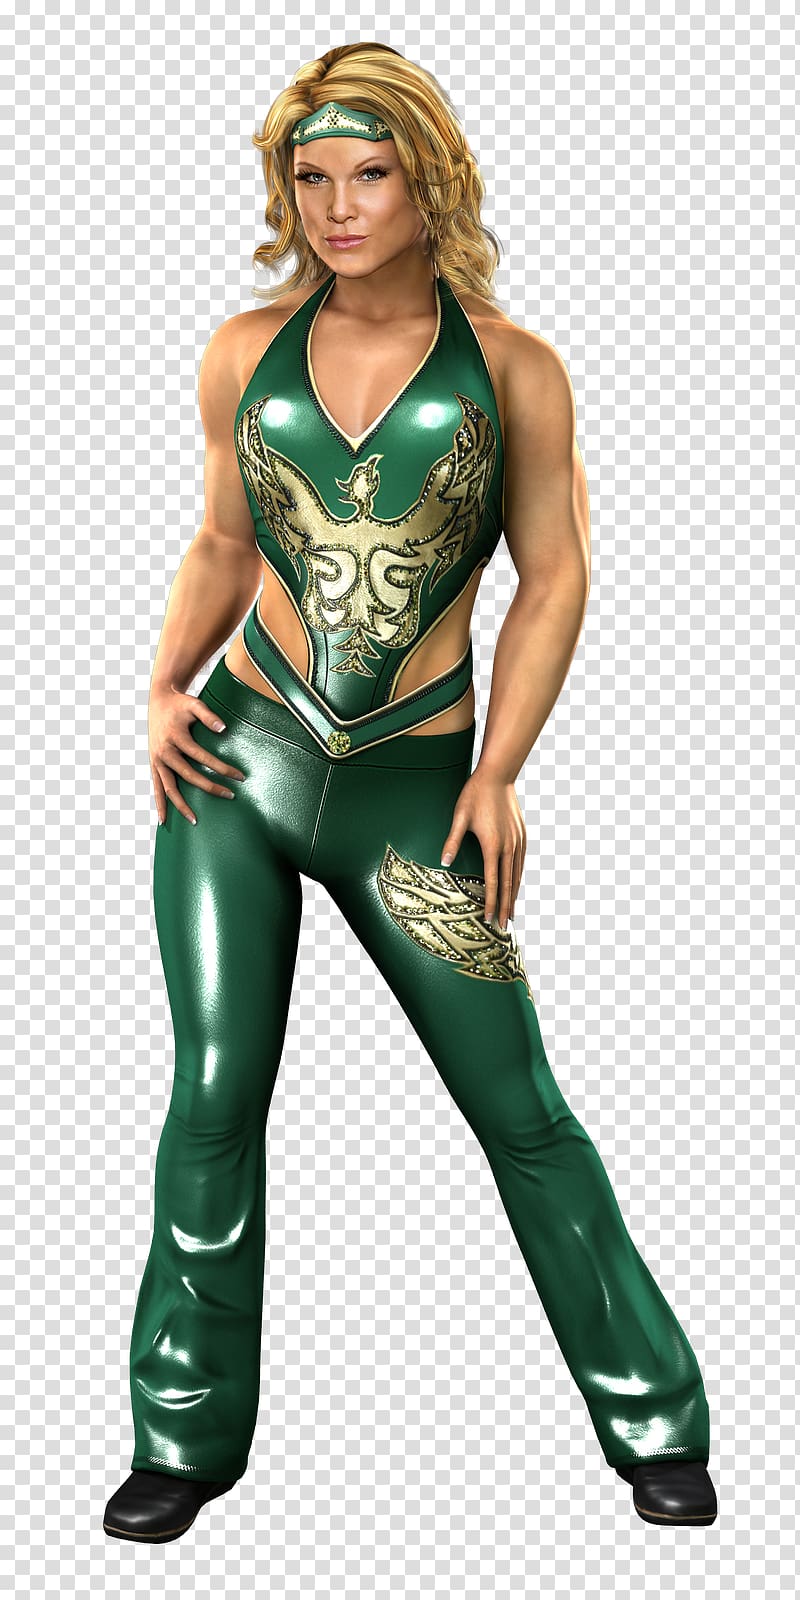 Beth Phoenix WWE SmackDown vs. Raw 2011 WWE SmackDown vs. Raw 2010 WWE \'12 WWE SmackDown vs. Raw 2009, Phoenix transparent background PNG clipart